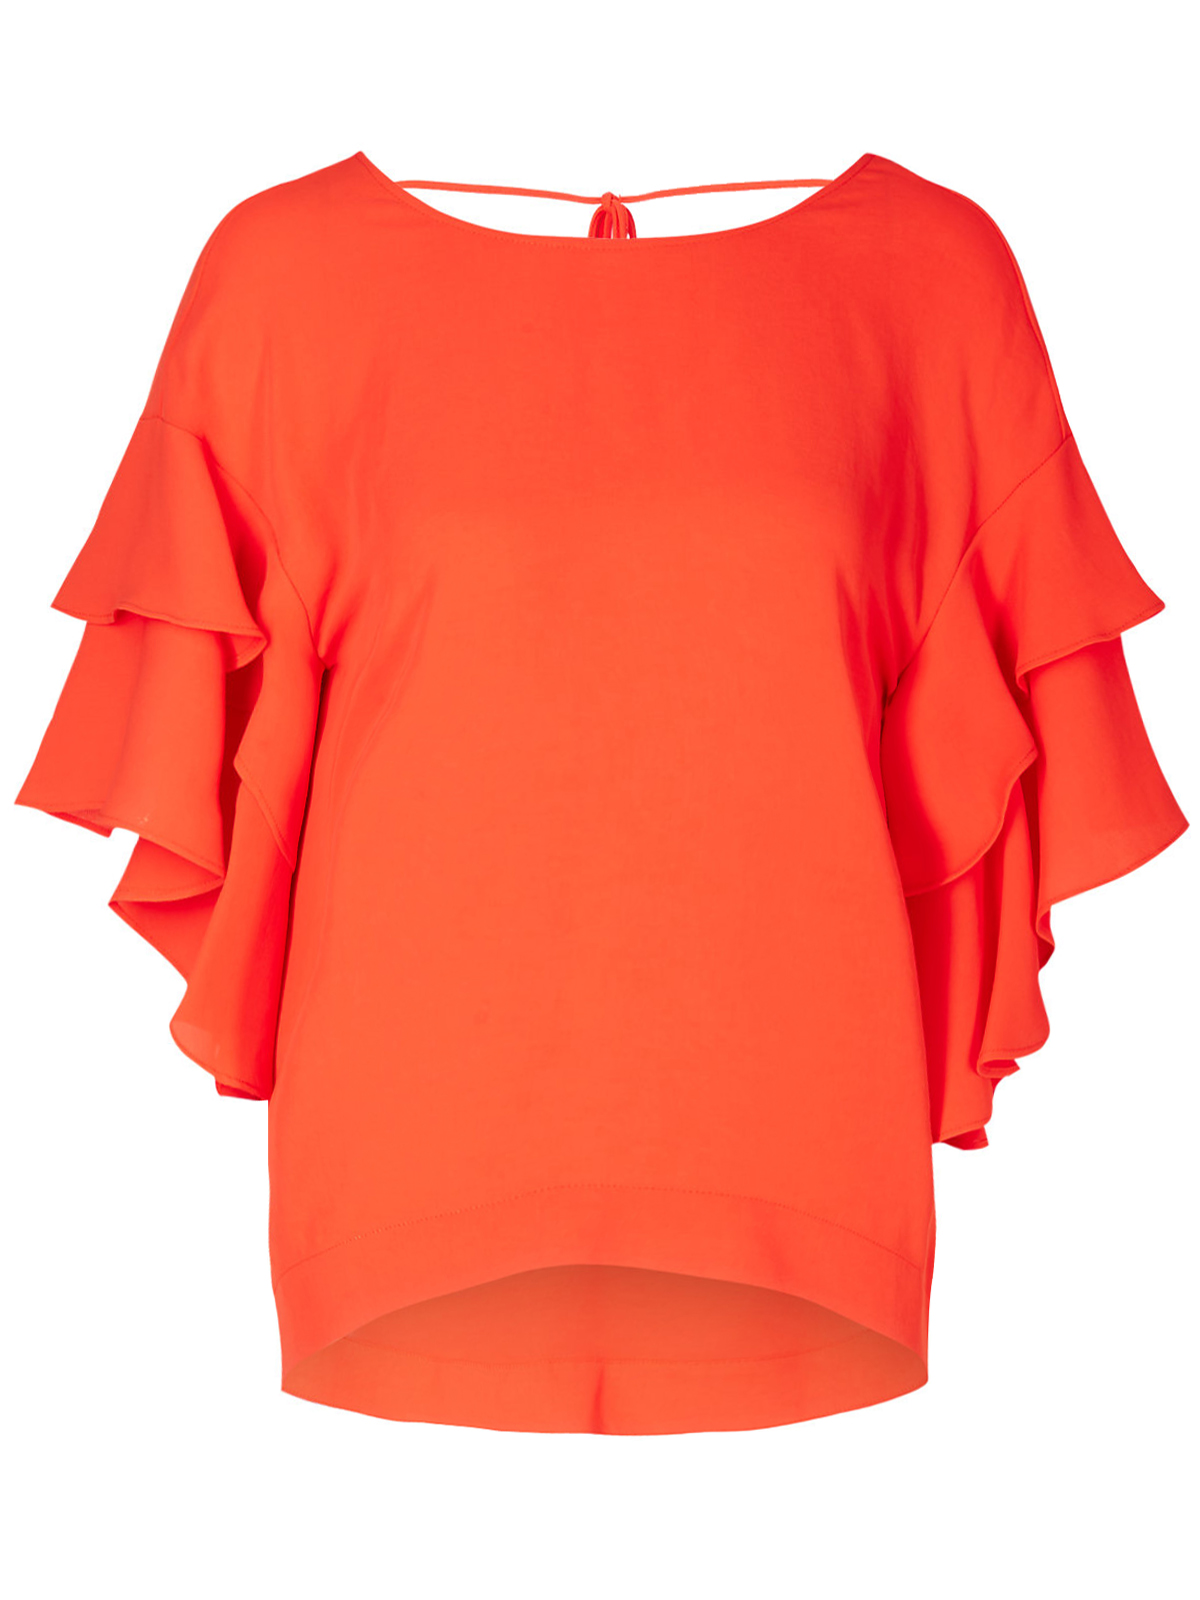 Marks and Spencer - - M&5 BRIGHT-ORANGE Flamenco Sleeve Shell Top ...